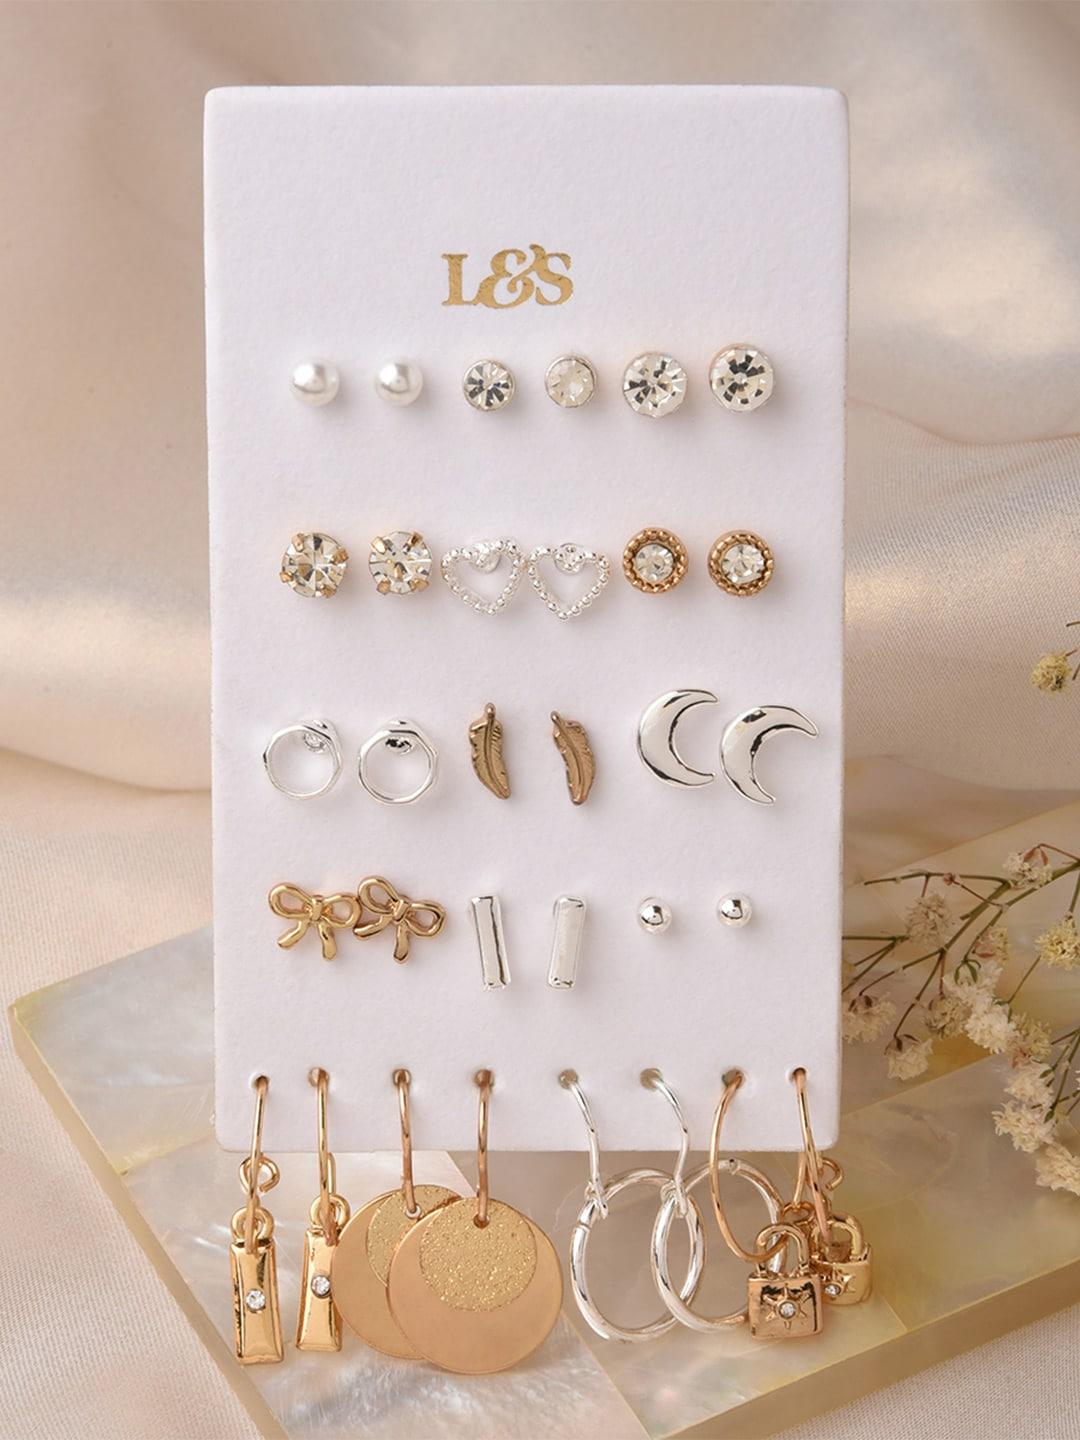 Lilly & sparkle Silver-Toned & Gold-Plated Circular Drop Earrings Set Of 12